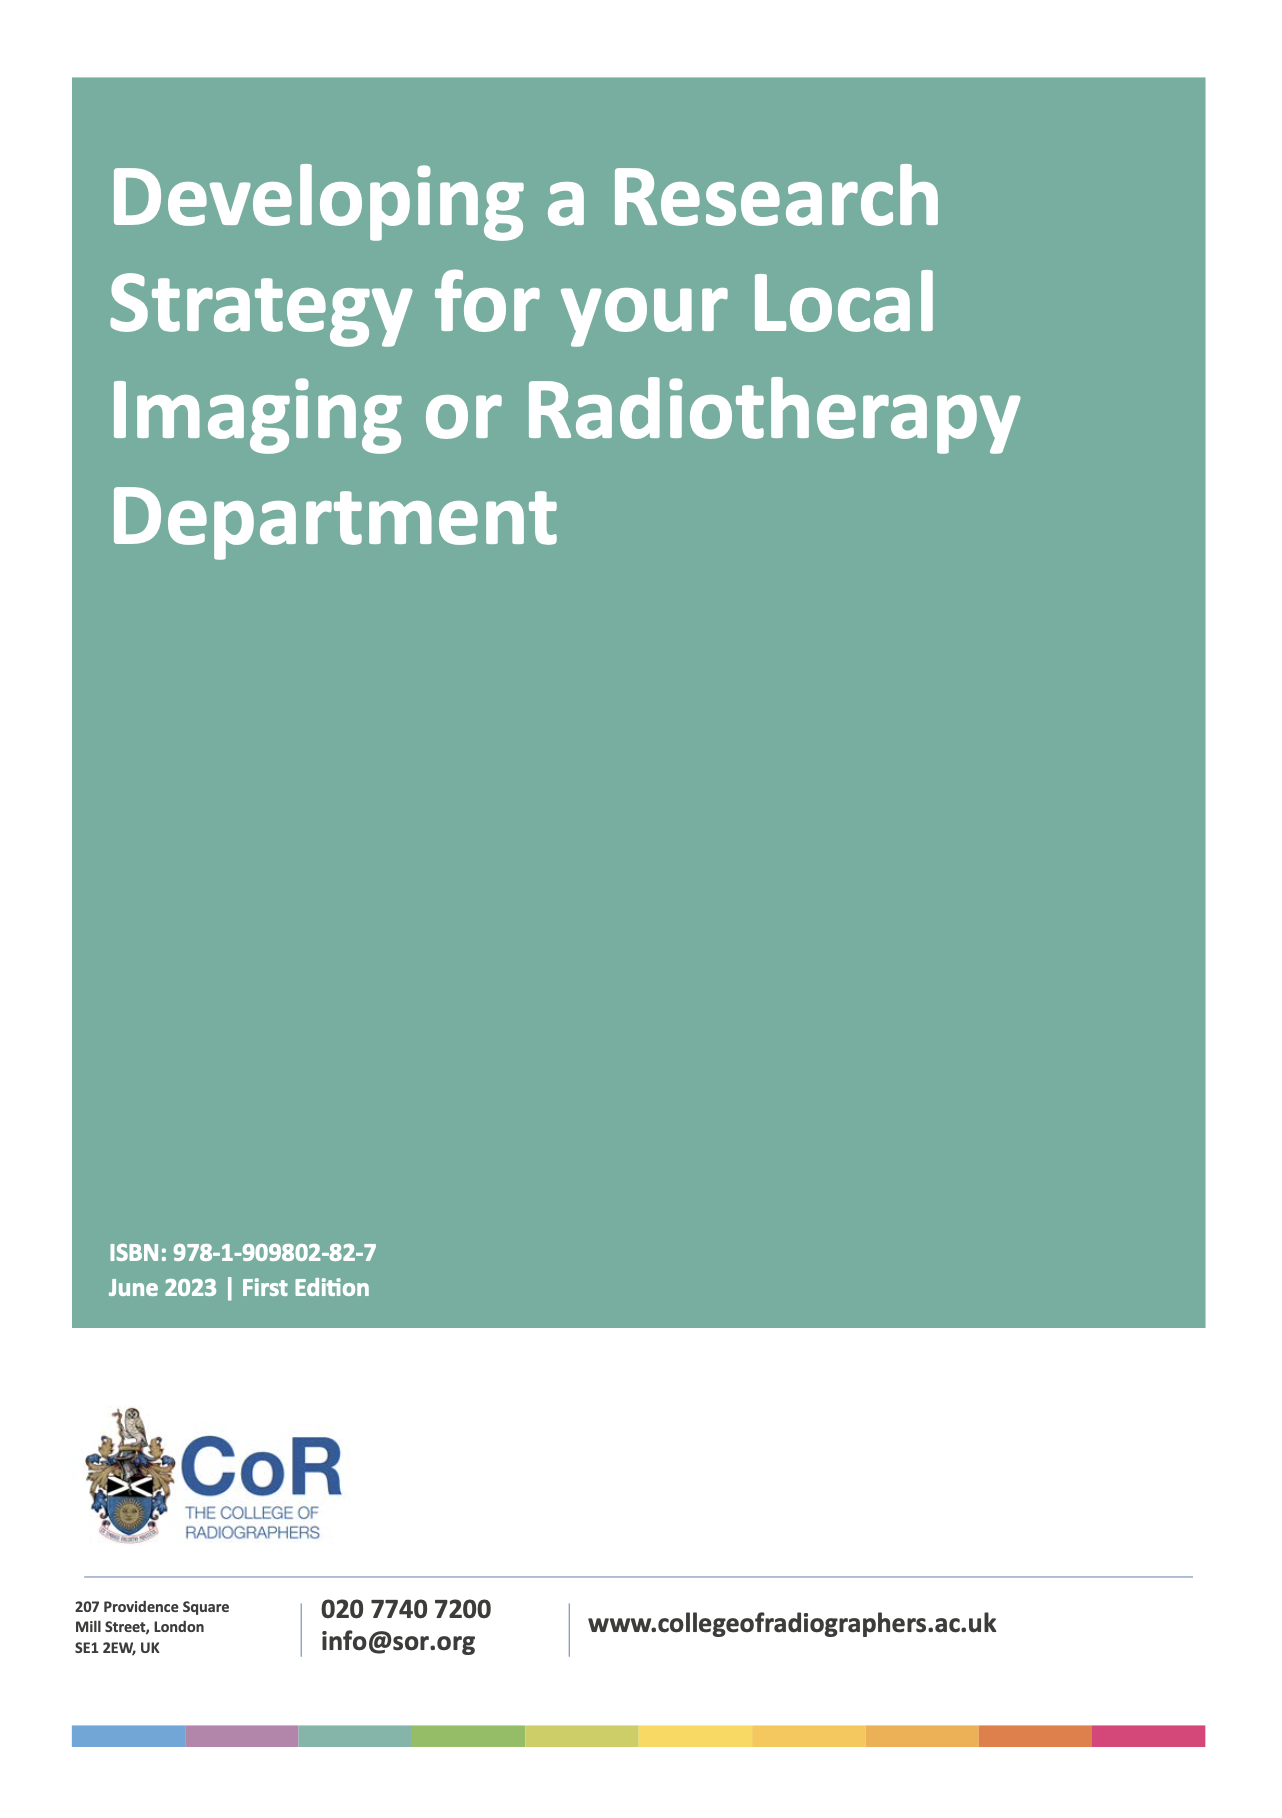 Developing a Research Strategy for your Local Imaging or Radiotherapy Department